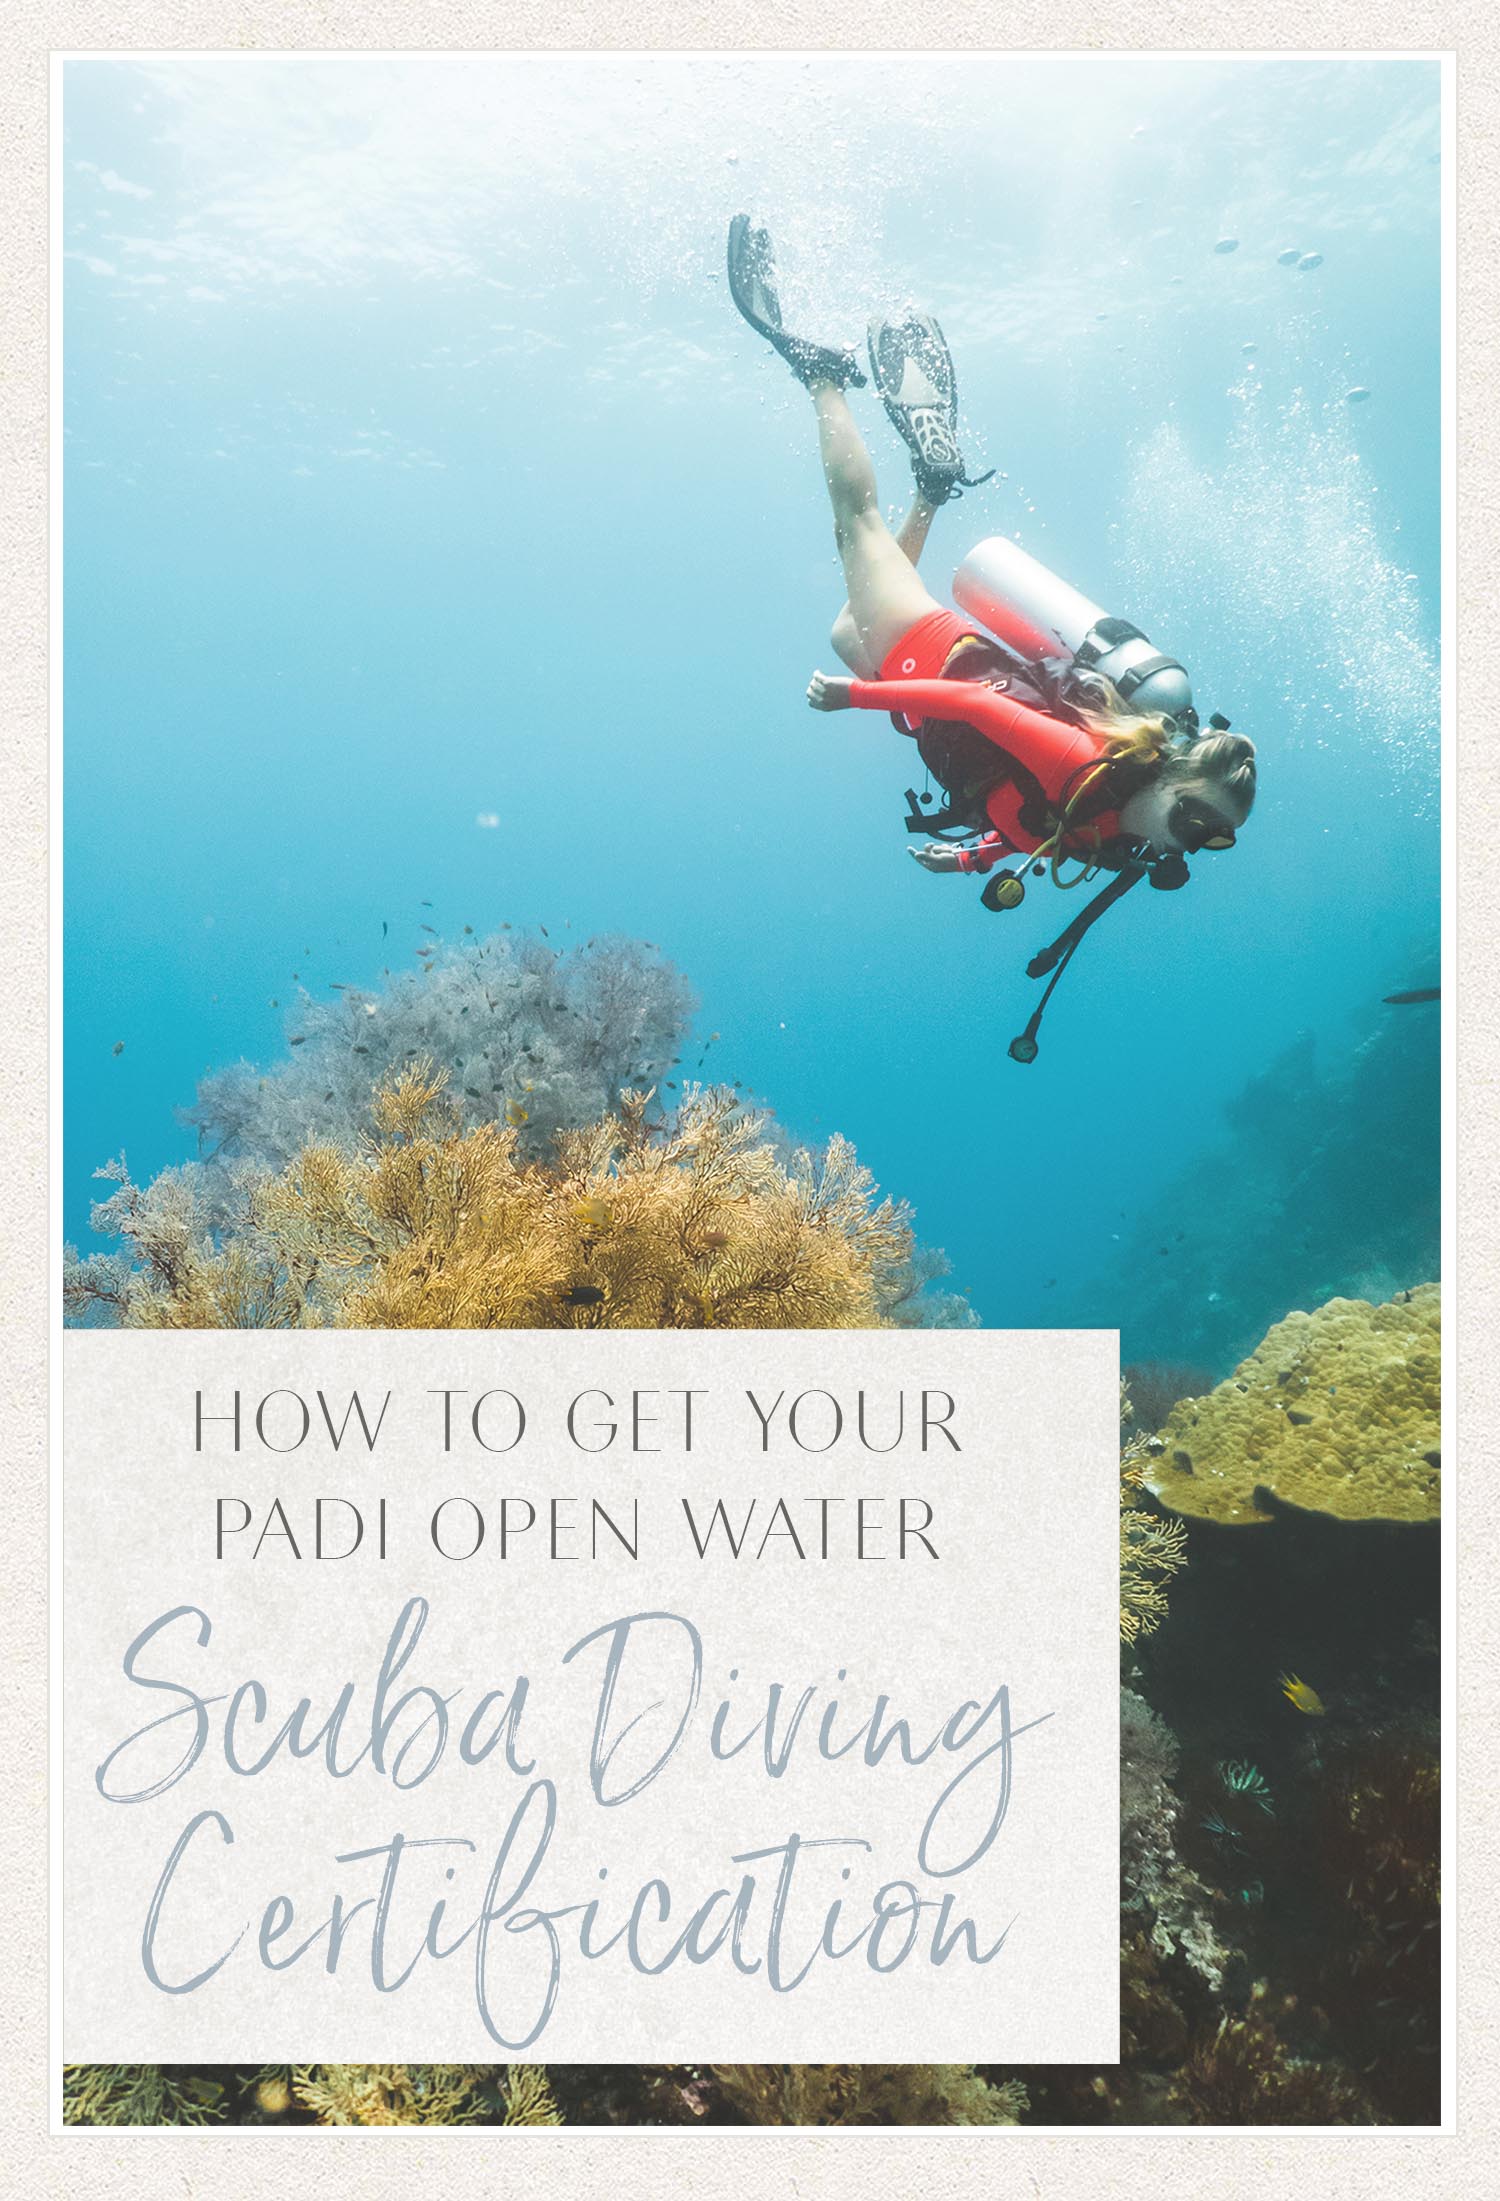 Padi Open Water Scuba Diving Certification How To 